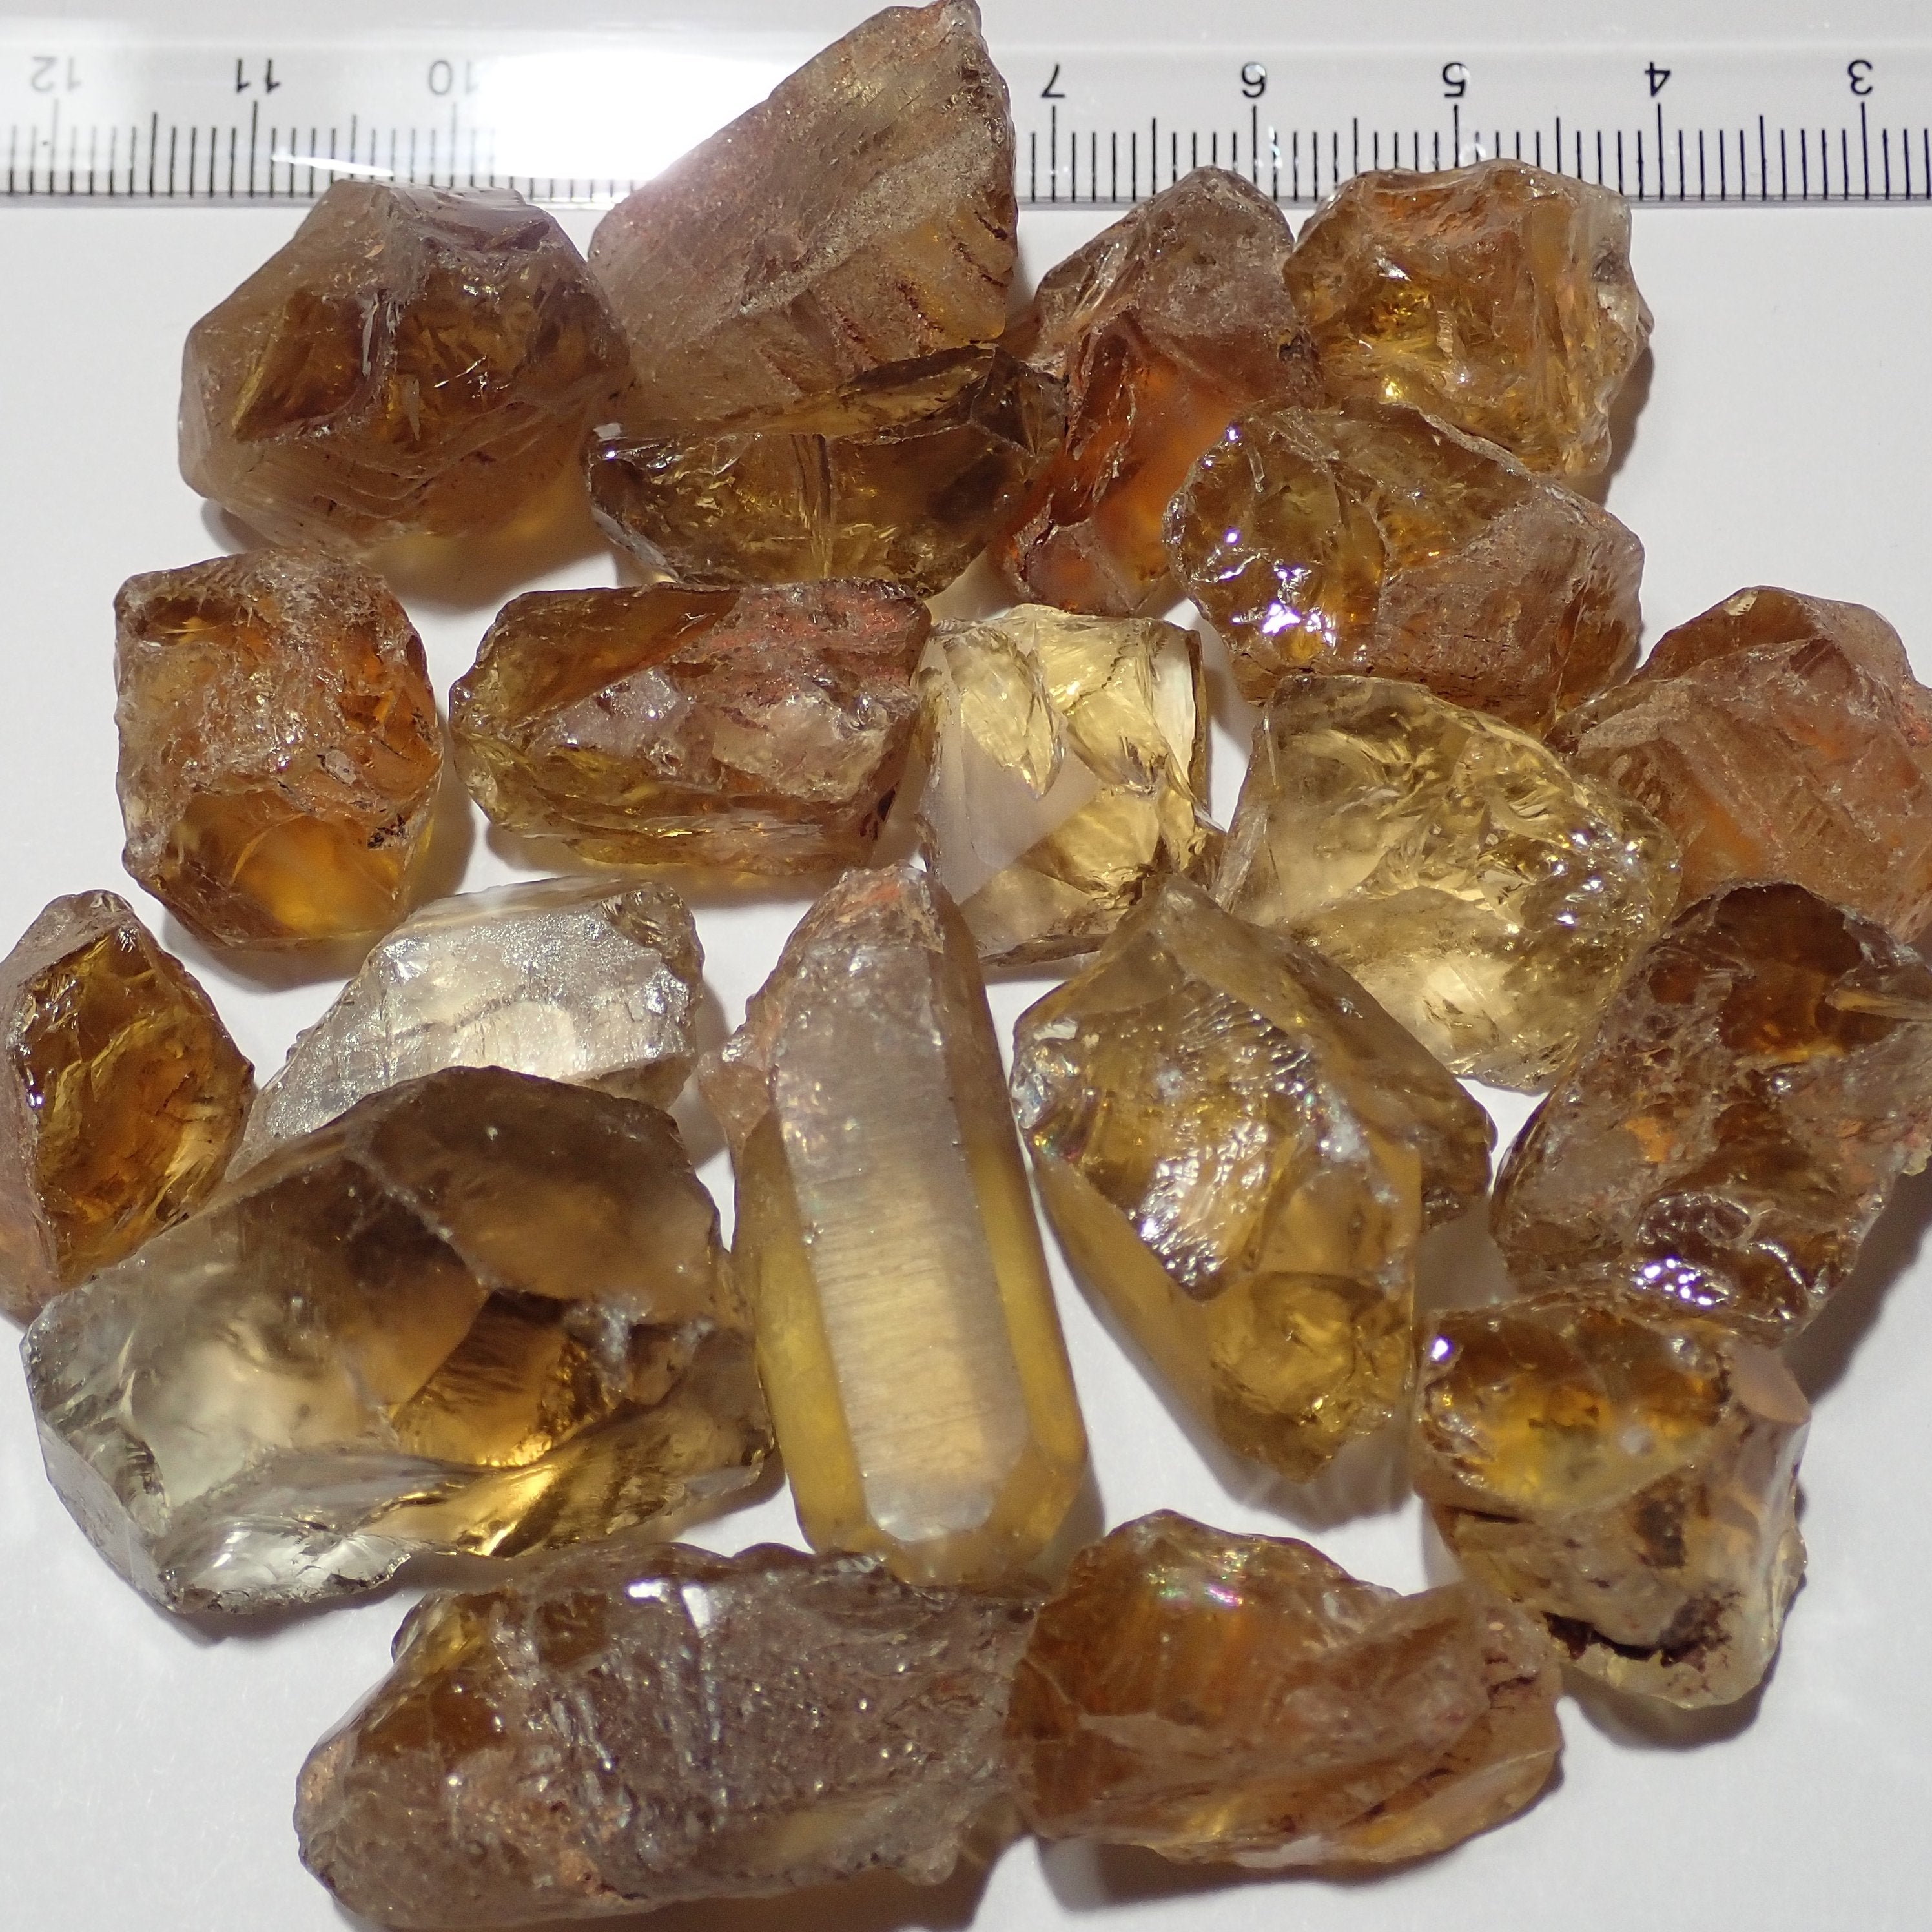 Citrine (Zambian) Lots. Cracks Coming Into The Stones. 10Ct (2Gm) To 75Ct (15Gm) Pieces. $1Per Gm